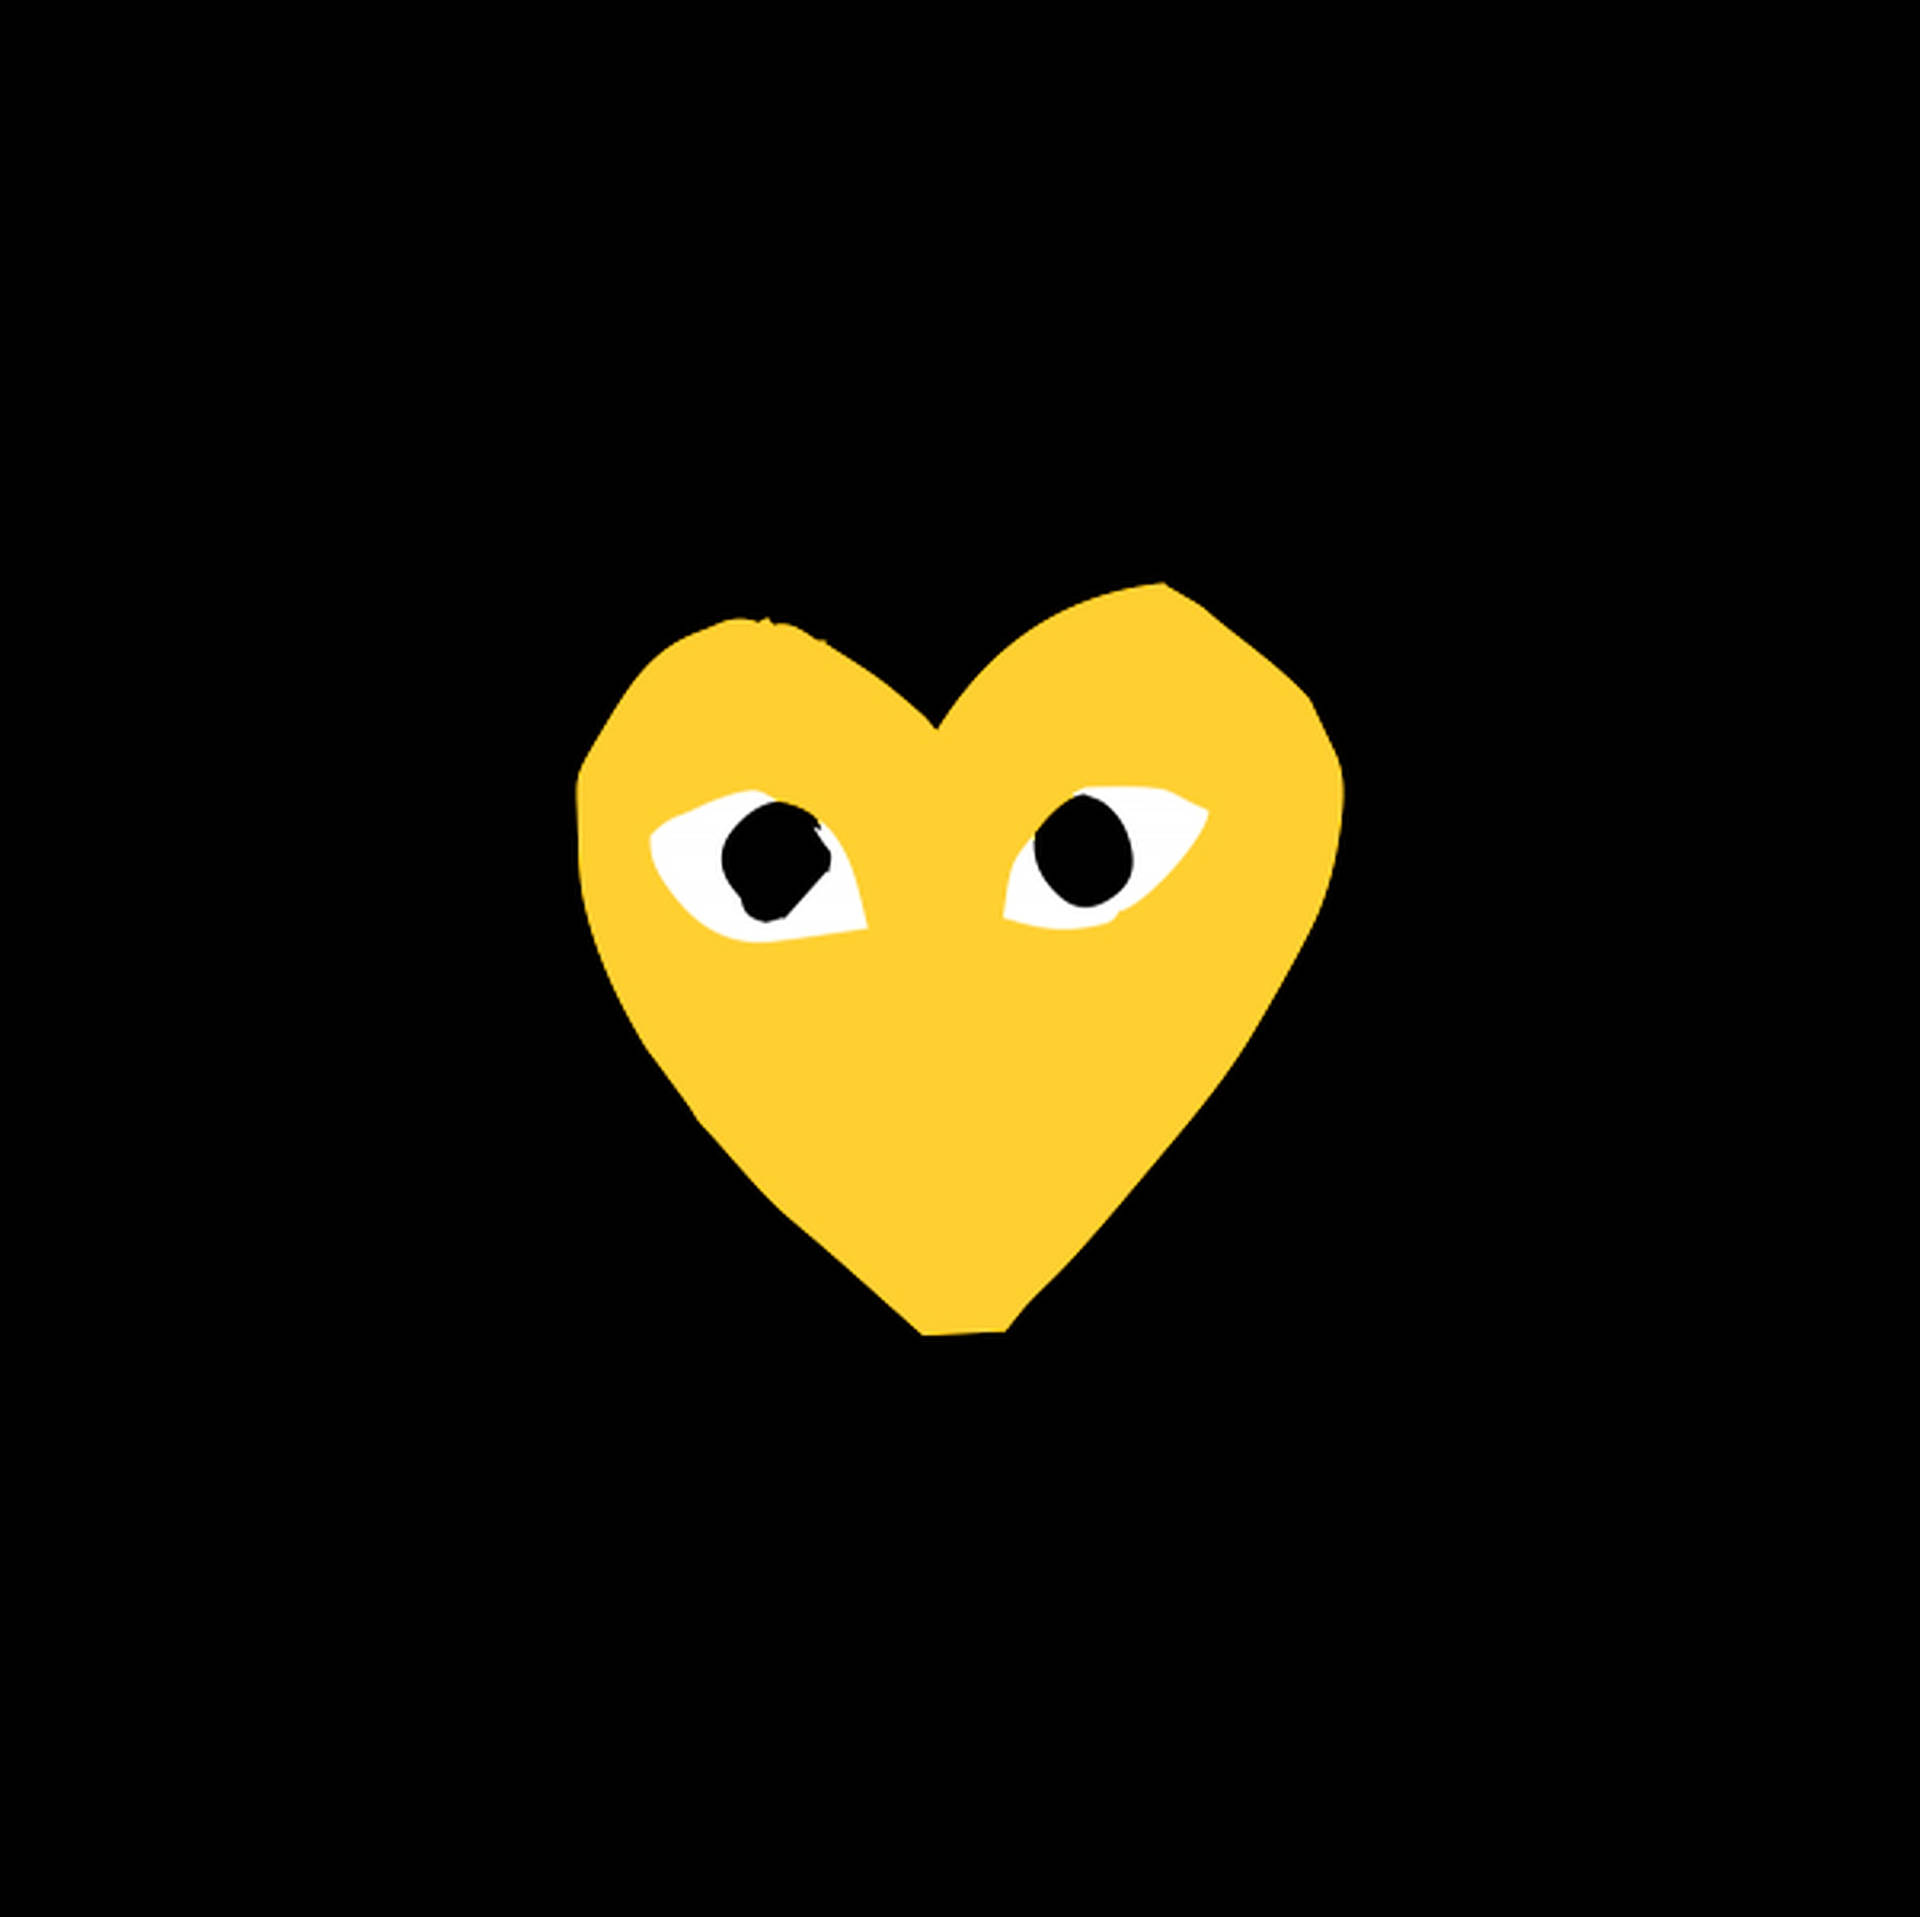 Black And Yellow Heart CDG Wallpaper